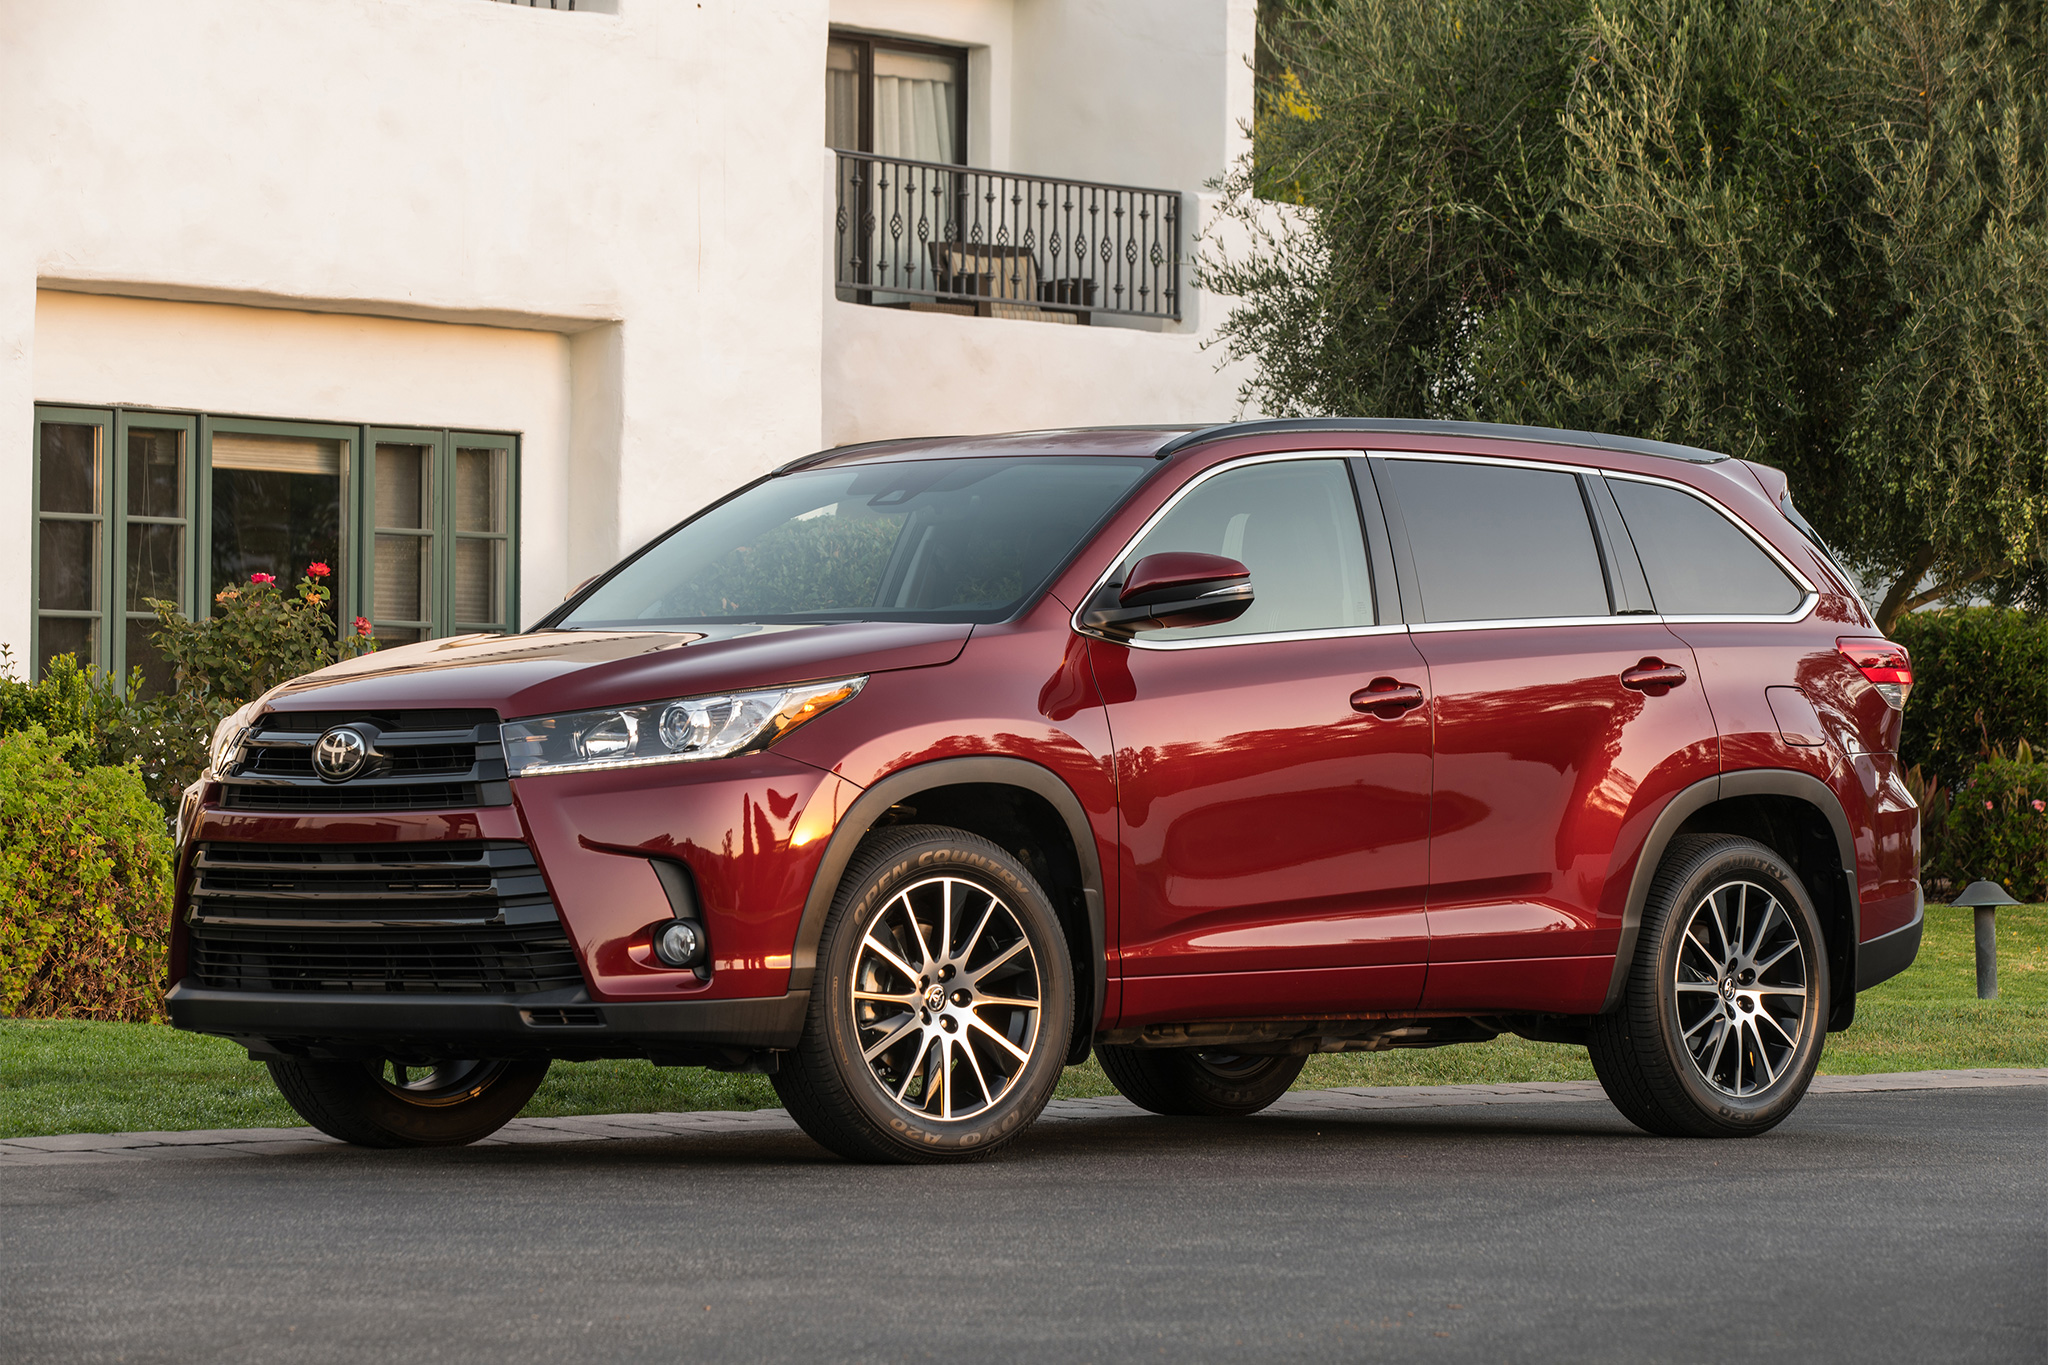 2017 Toyota Highlander Test Drive And Review Specifications